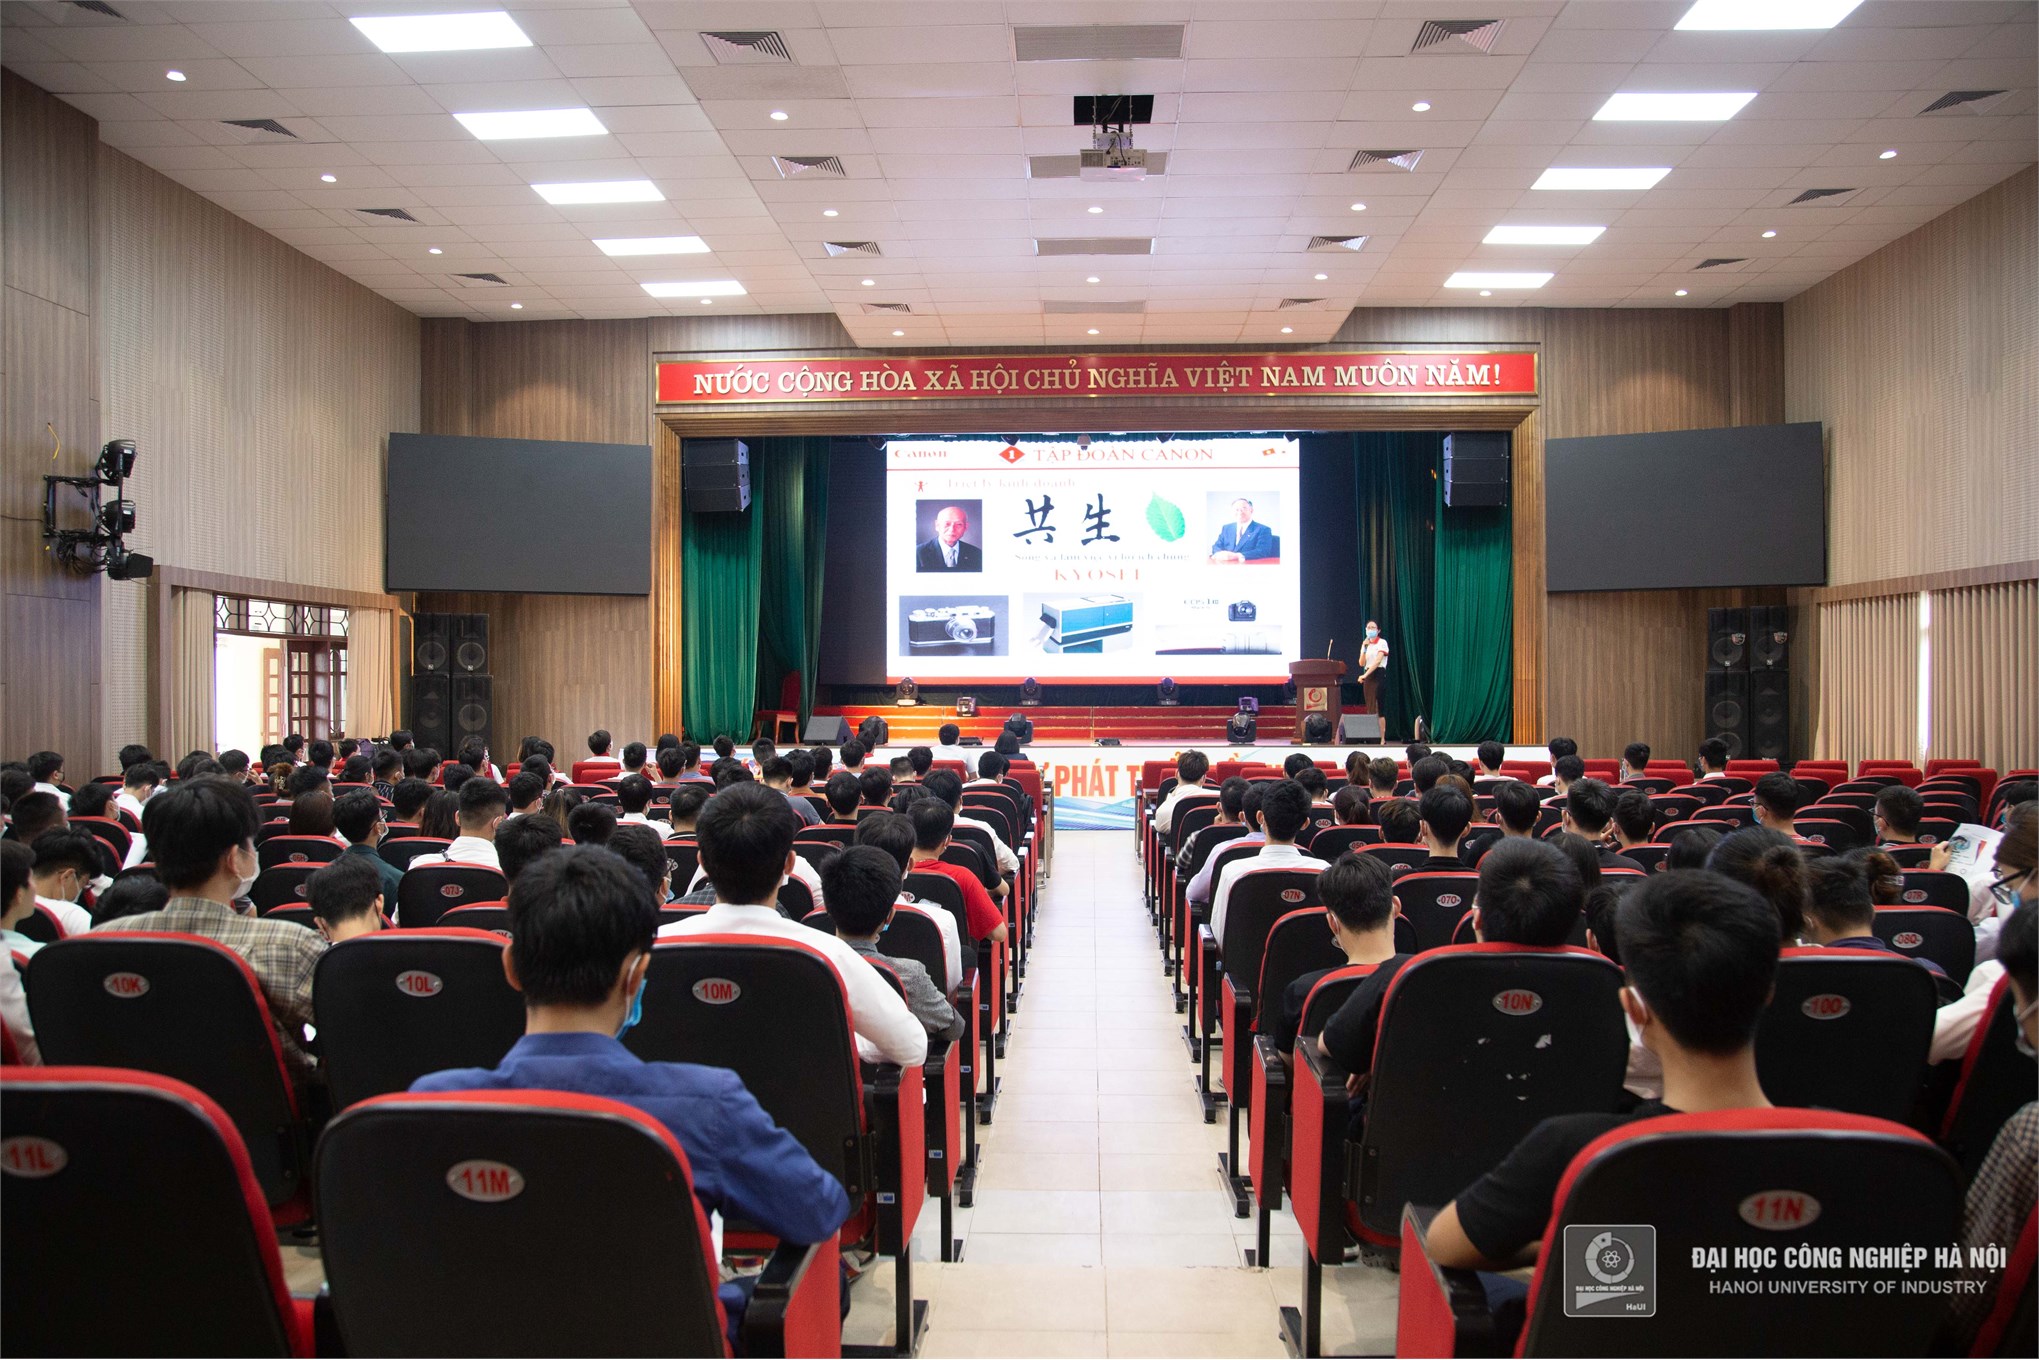 Many job opportunities for students at Canon Vietnam Co., Ltd